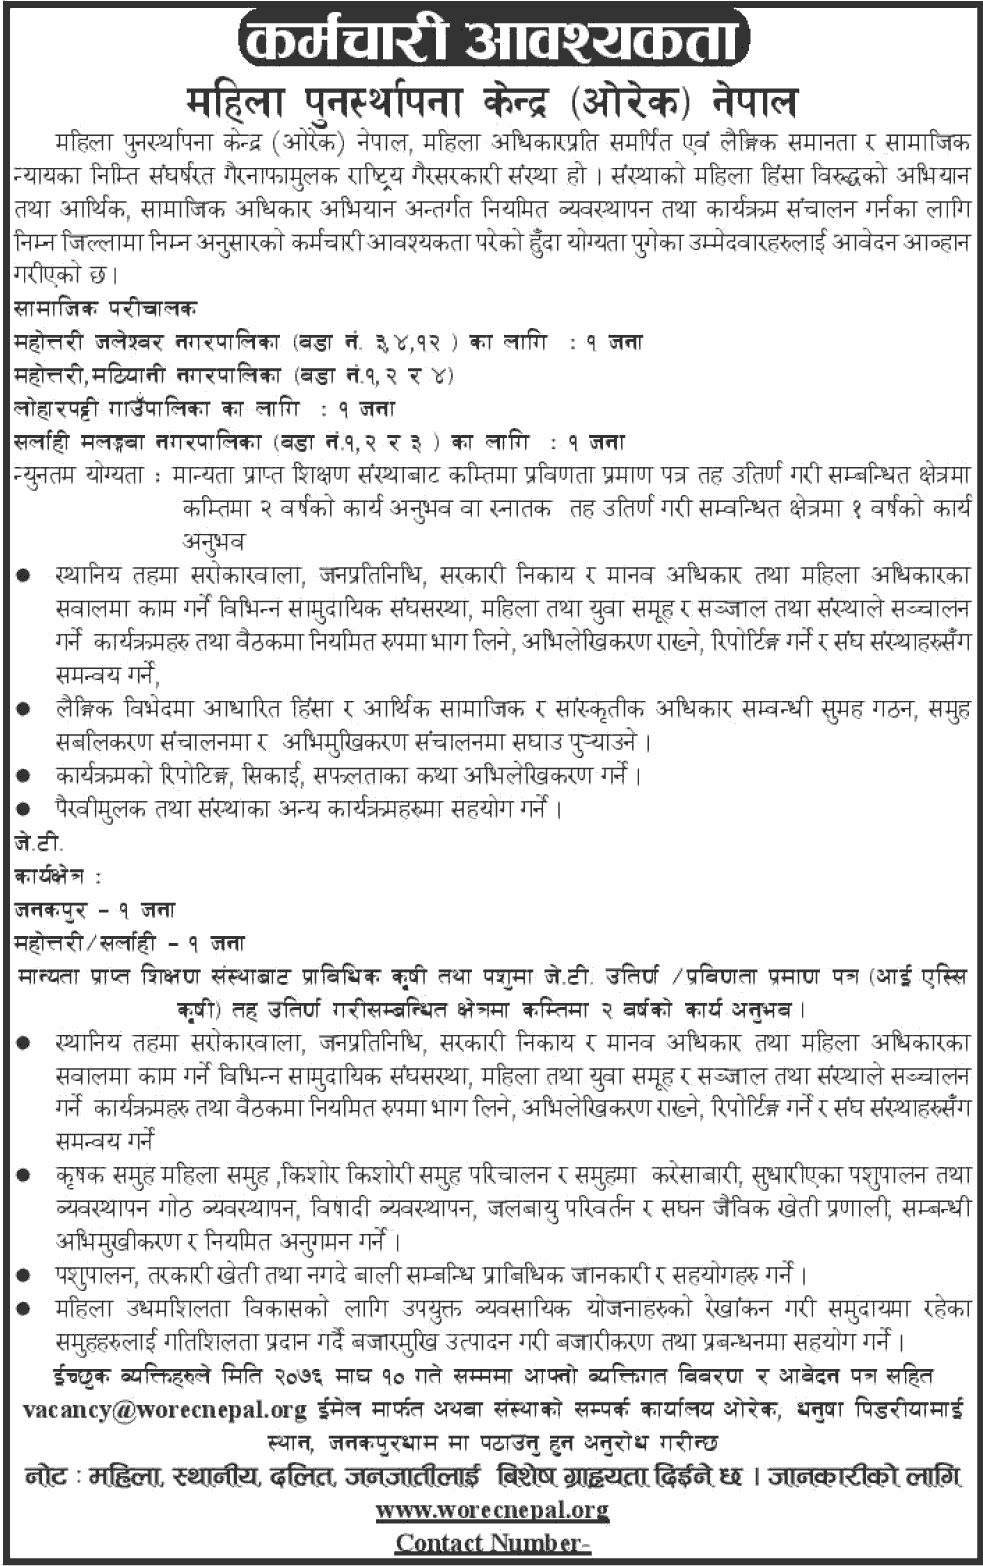 WOREC Nepal Vacancy for Social Mobilizer